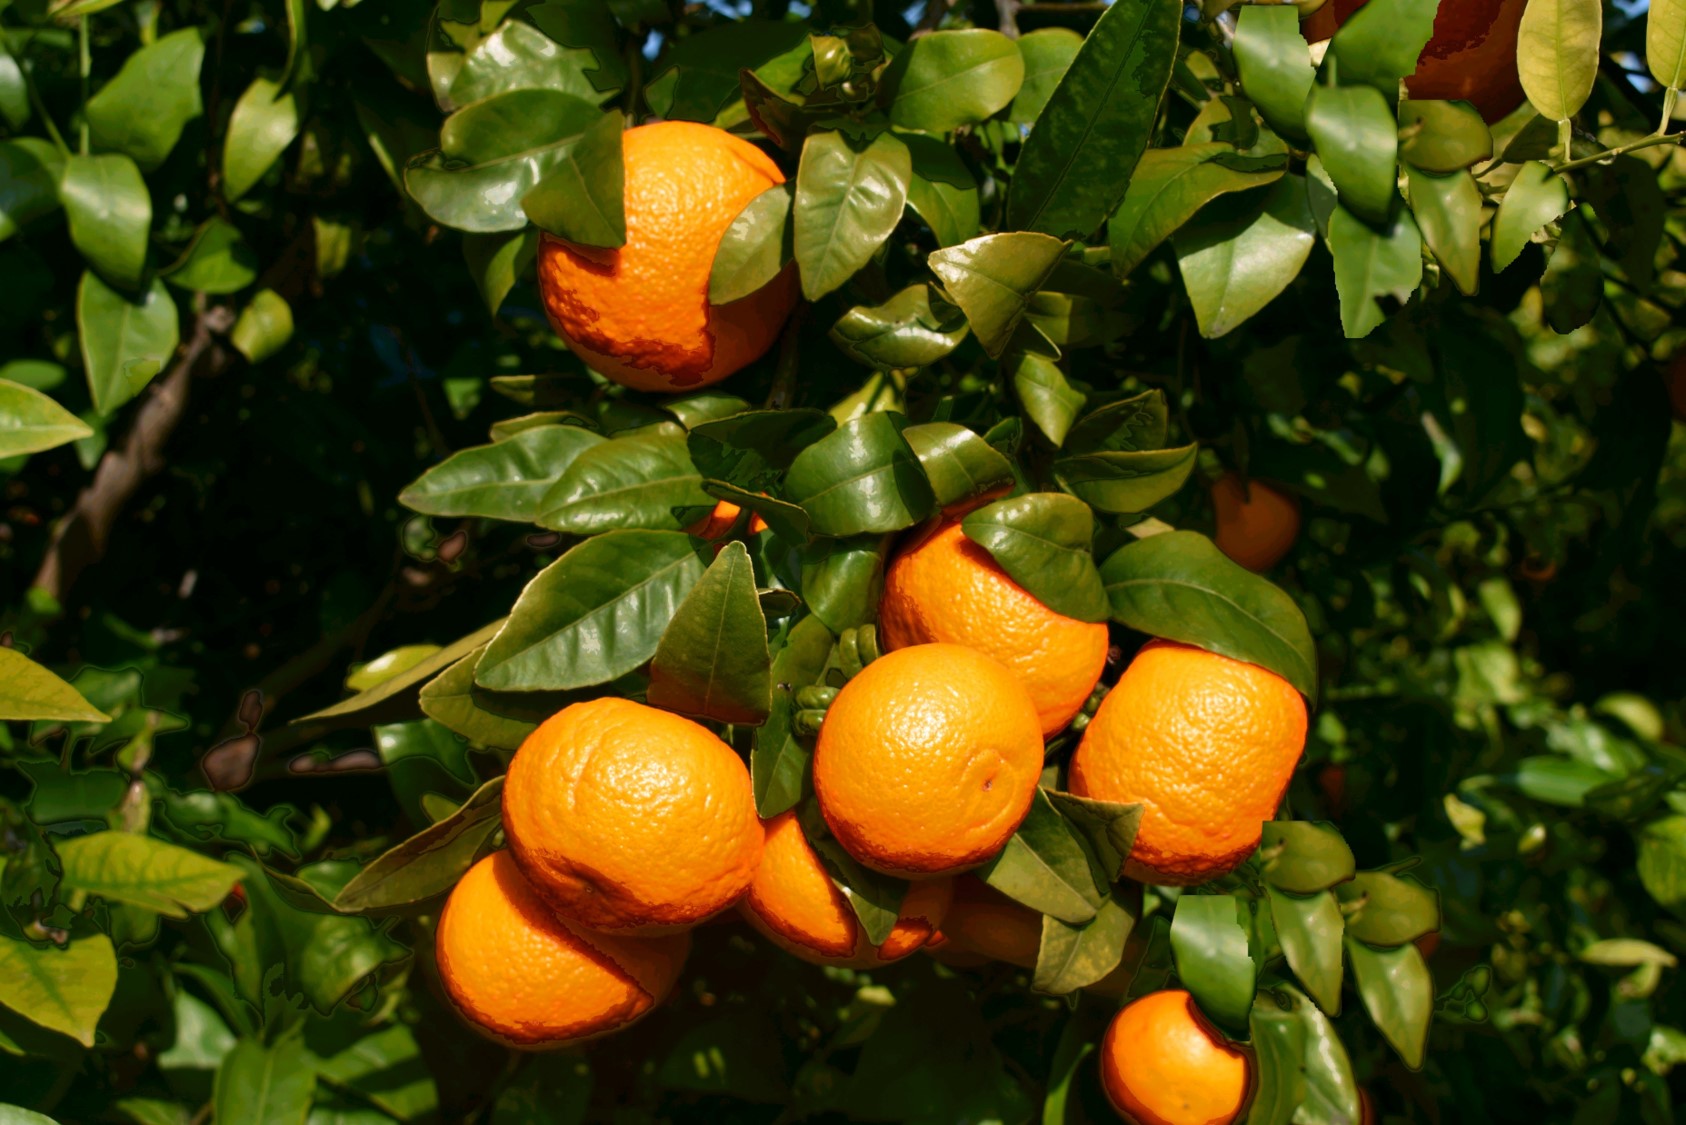 Another year of booming sales for Orri tangerine